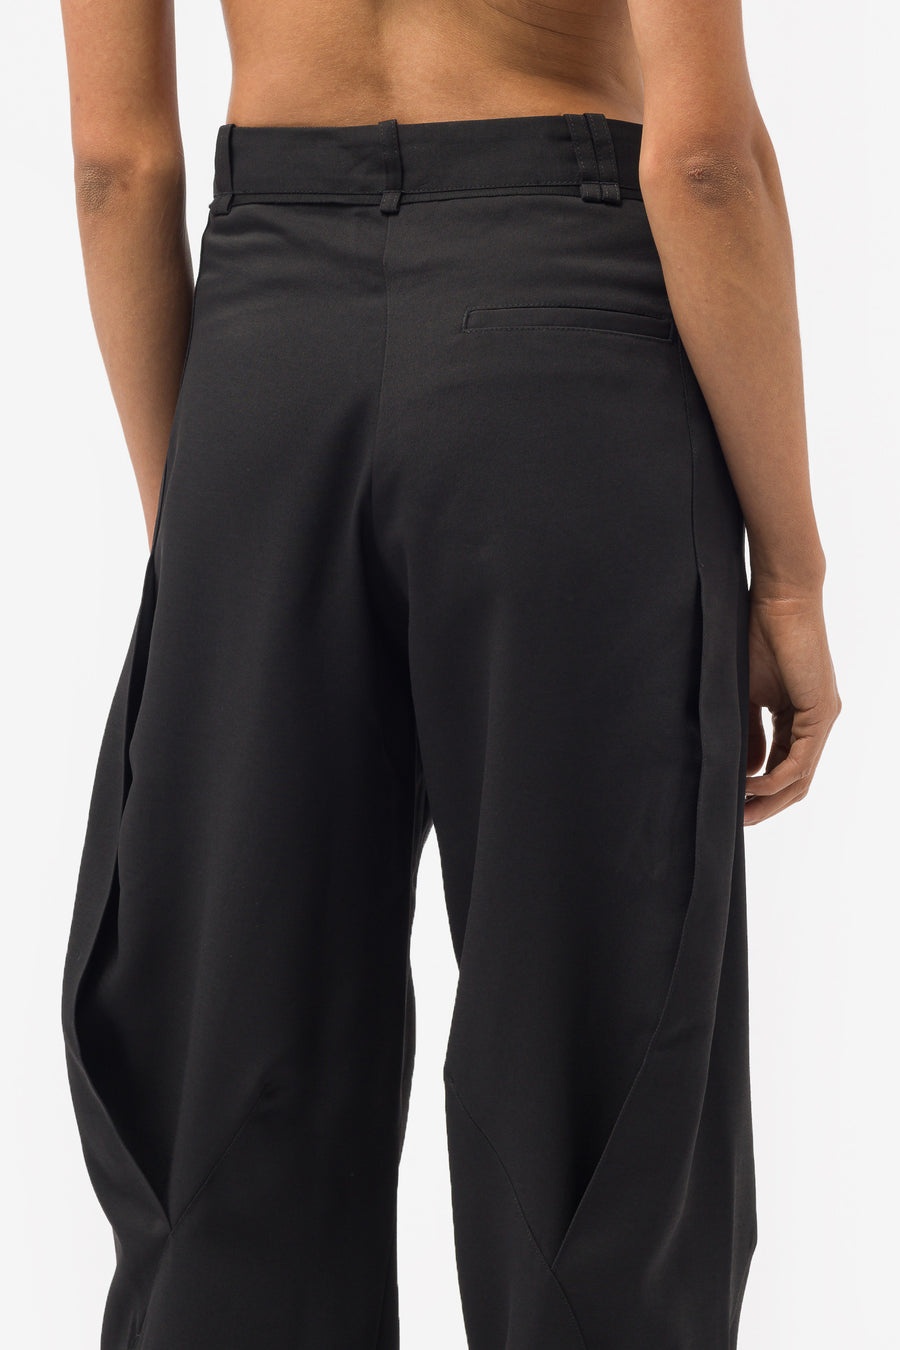 Hina Pleat Trousers in Crow Black - 5